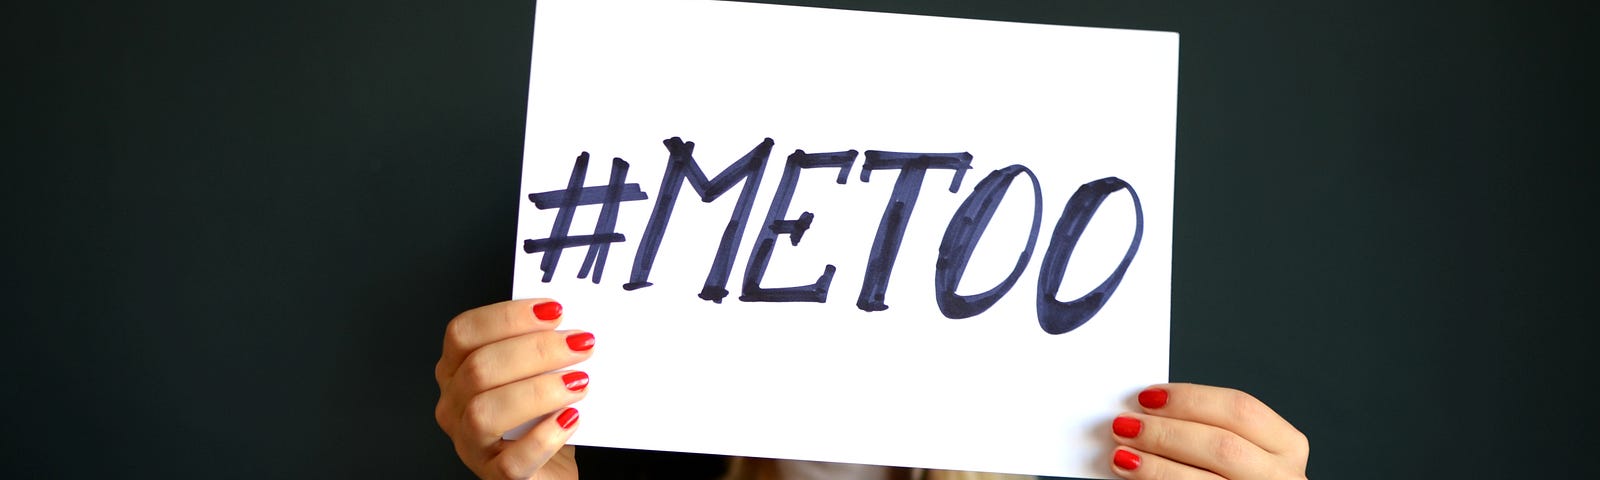 No means no. Woman holding a #metoo sign